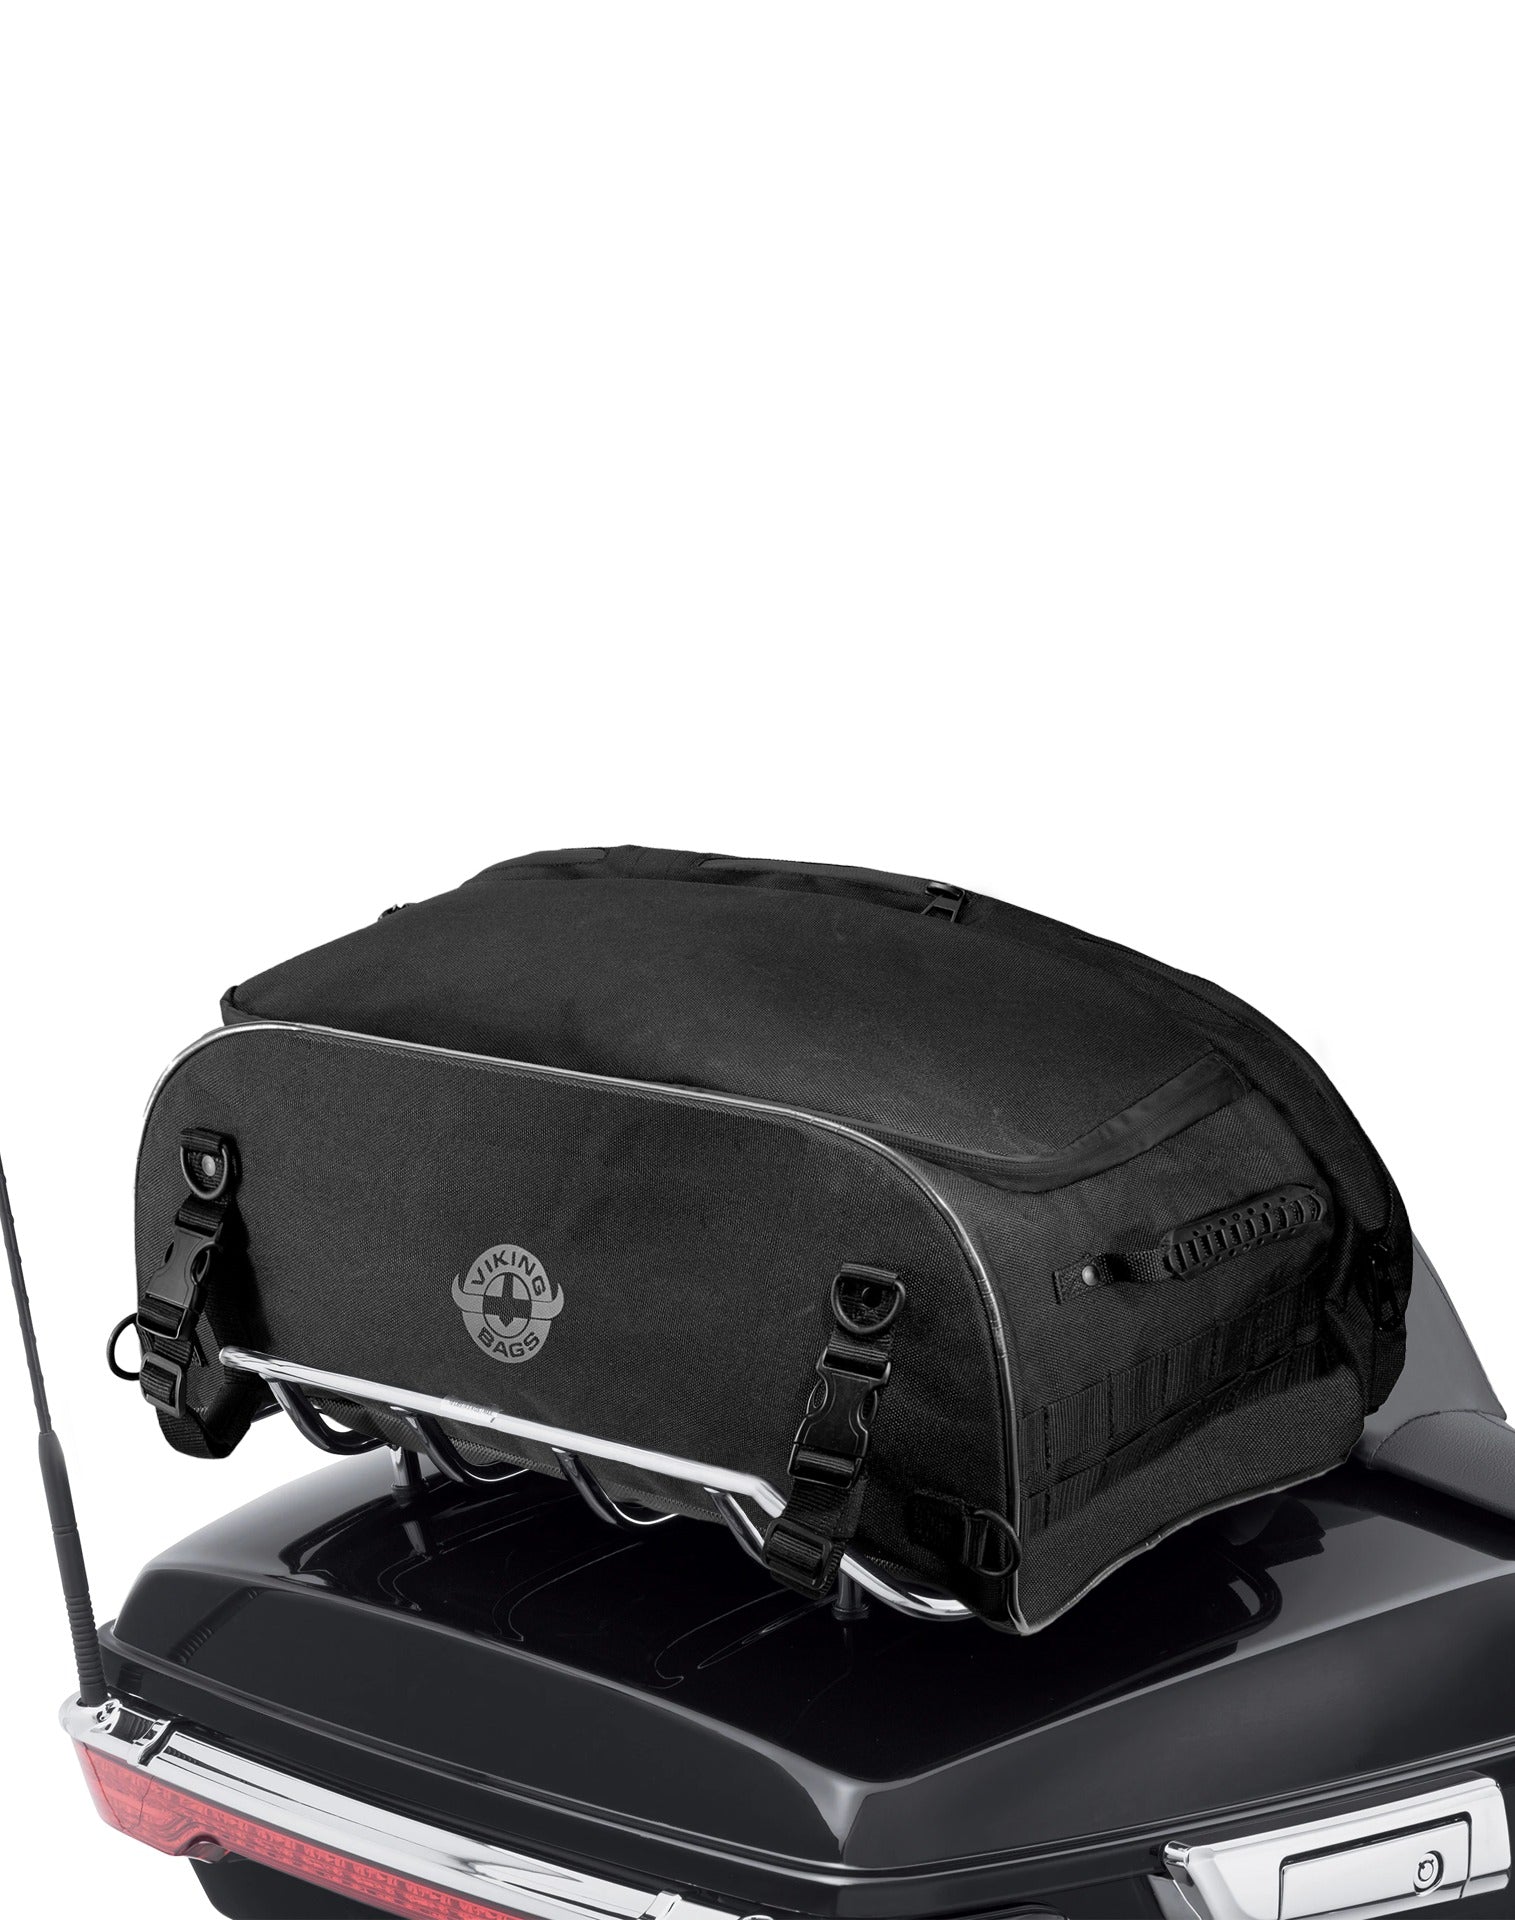 42L - Voyage Collapsible XL Triumph Motorcycle Luggage Rack Bag